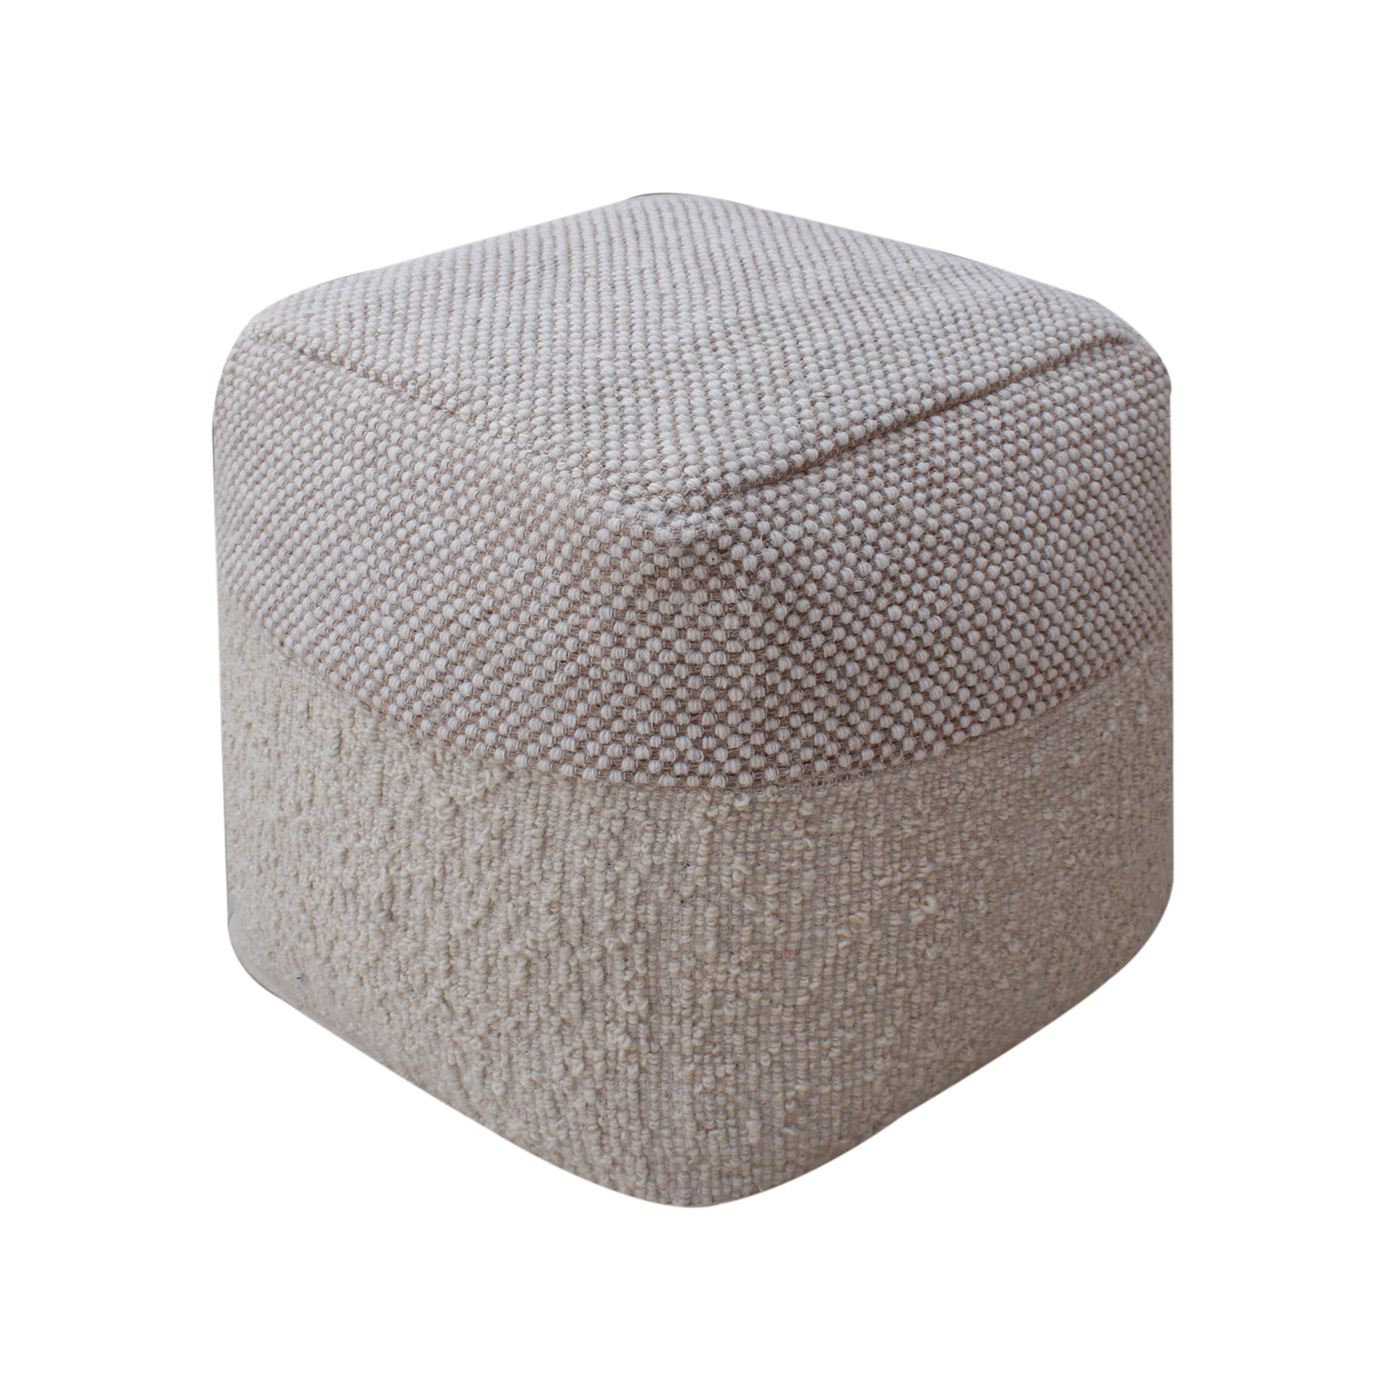 Orsis Pouf, Wool, Polyester, Natural White, Beige, Hand woven, All Loop 